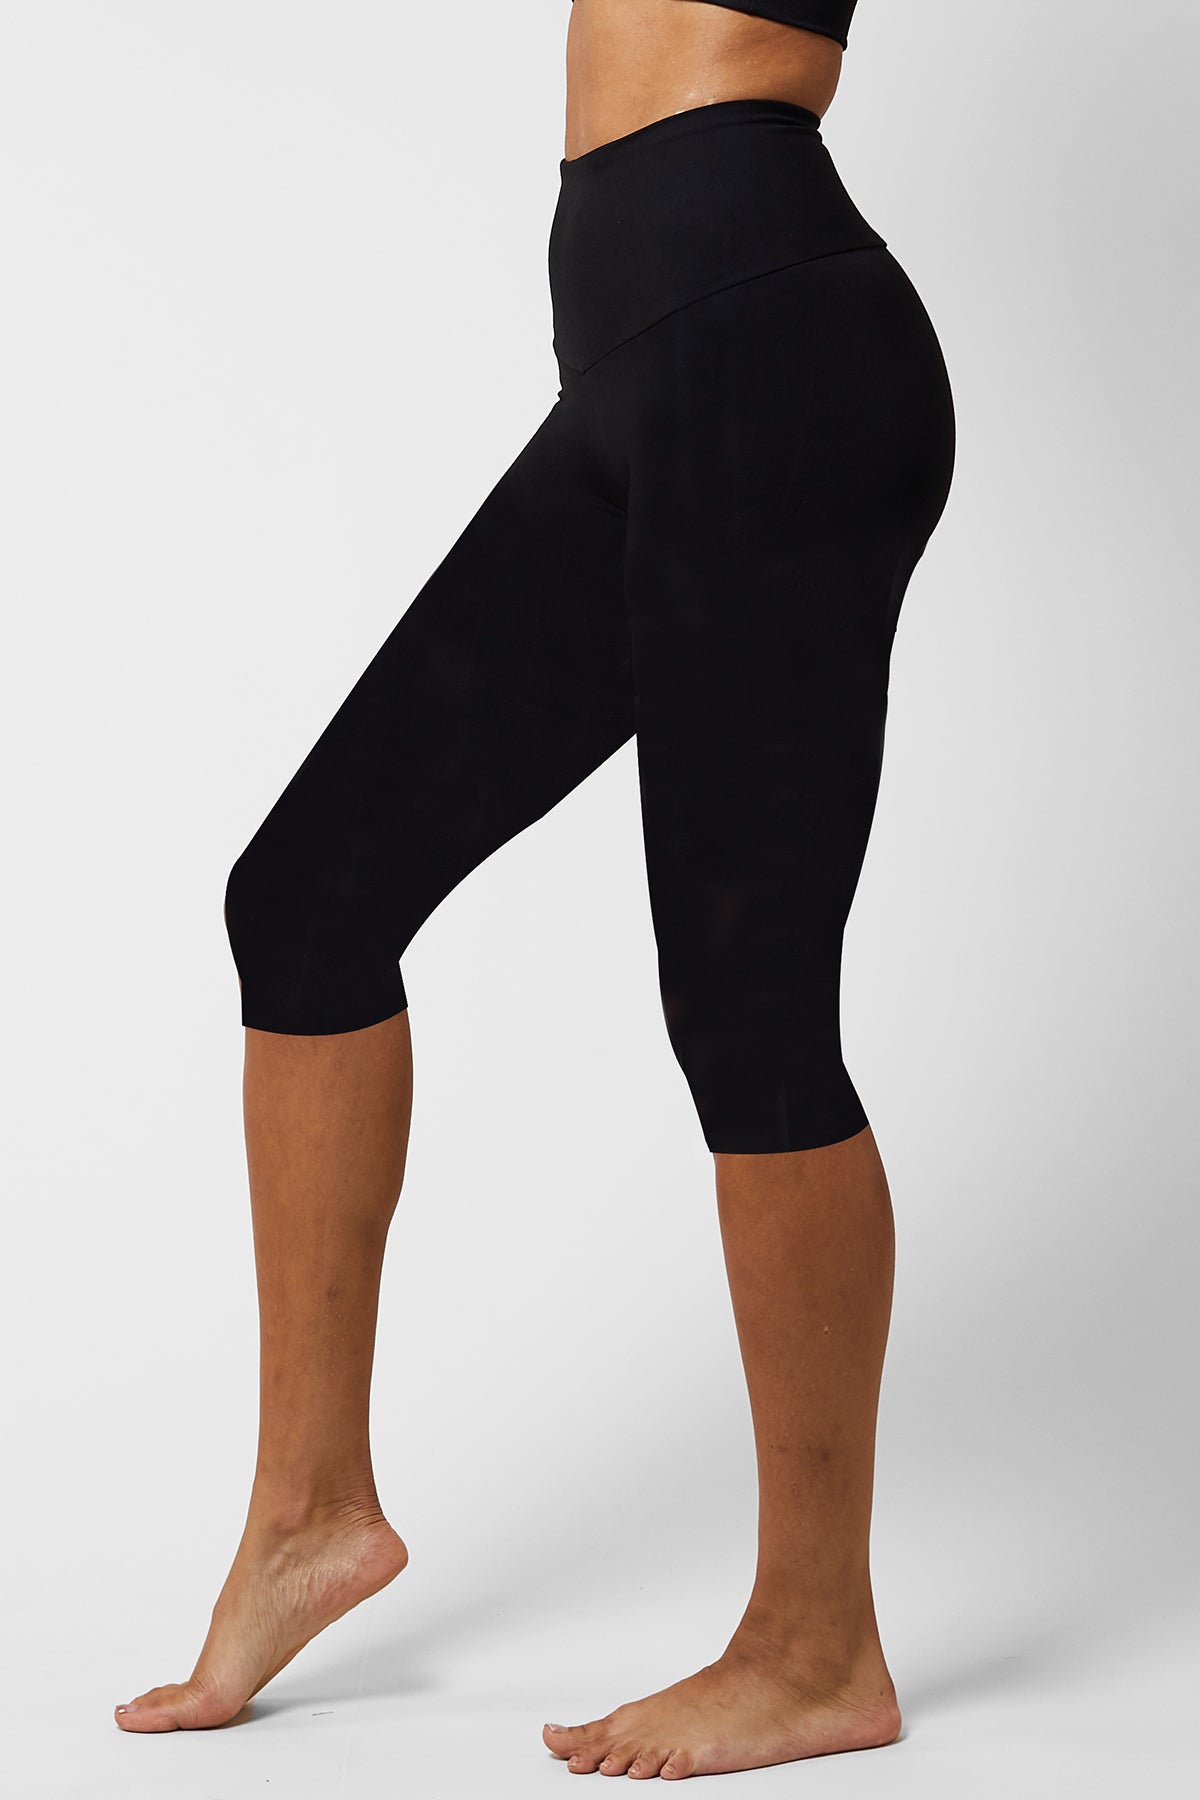 DKNY Women's High Waist Tummy Control Cropped Workout Yoga Leggings, Black  at  Women's Clothing store